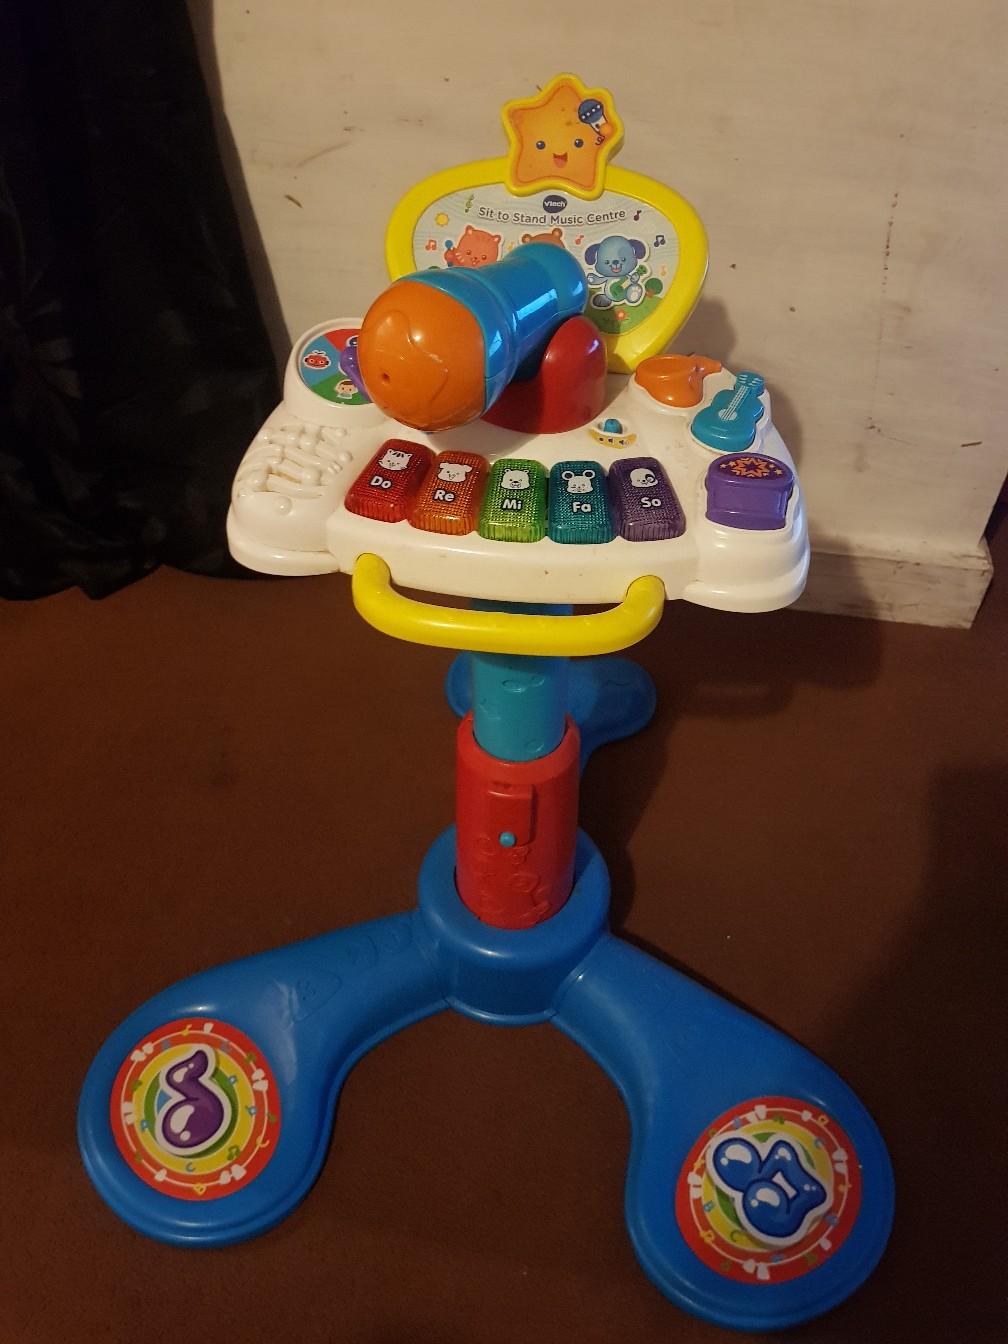 80-157603 for sale online VTech Sit to Stand Music Centre Toy 